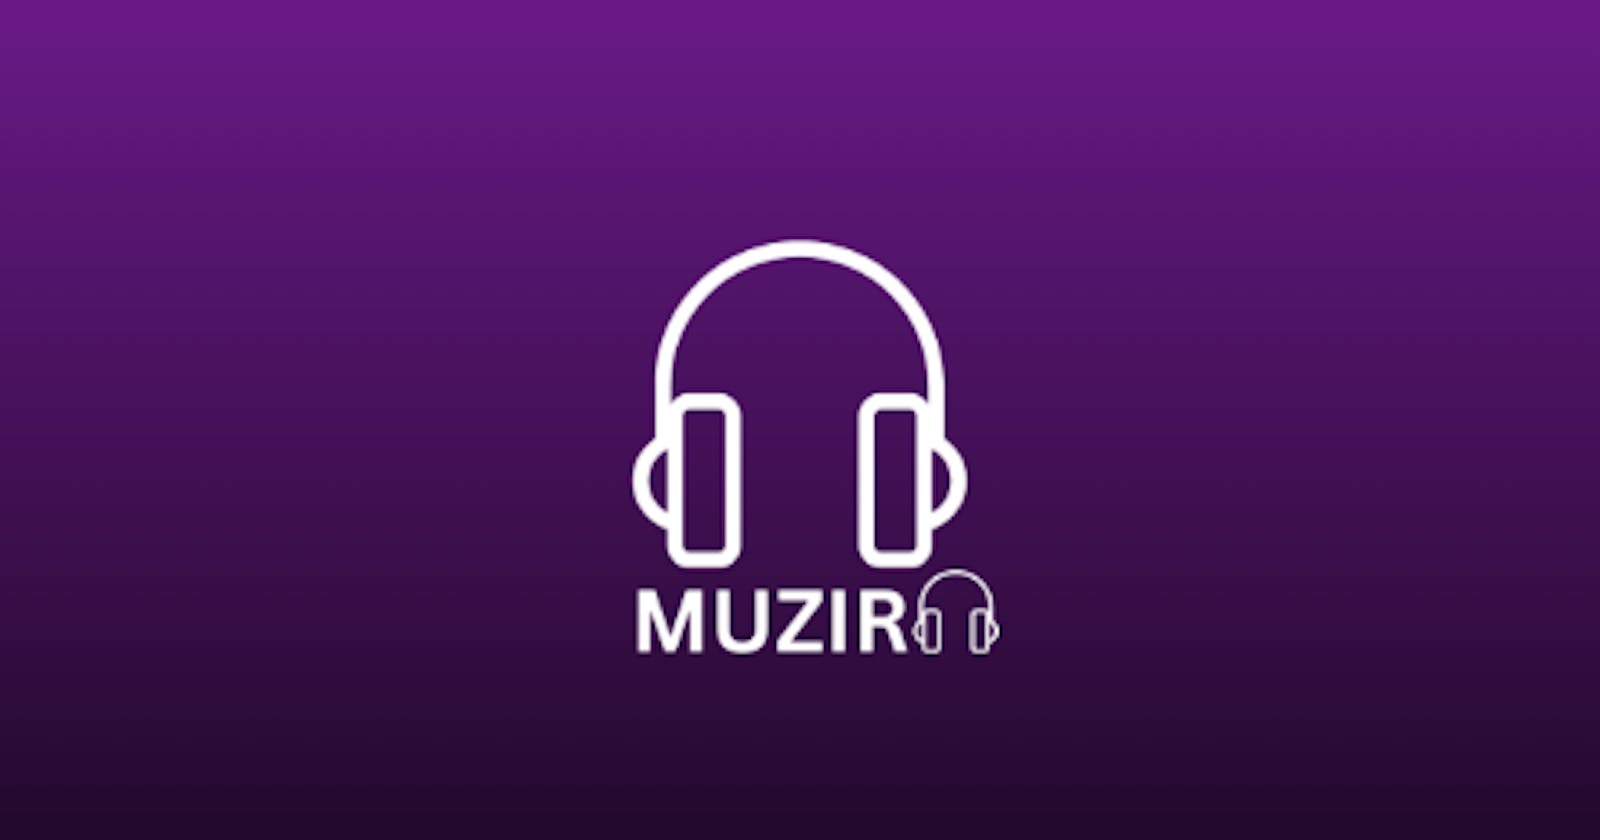 Product Management Chronicles: Managing the Delivery of Muzira - a Music App